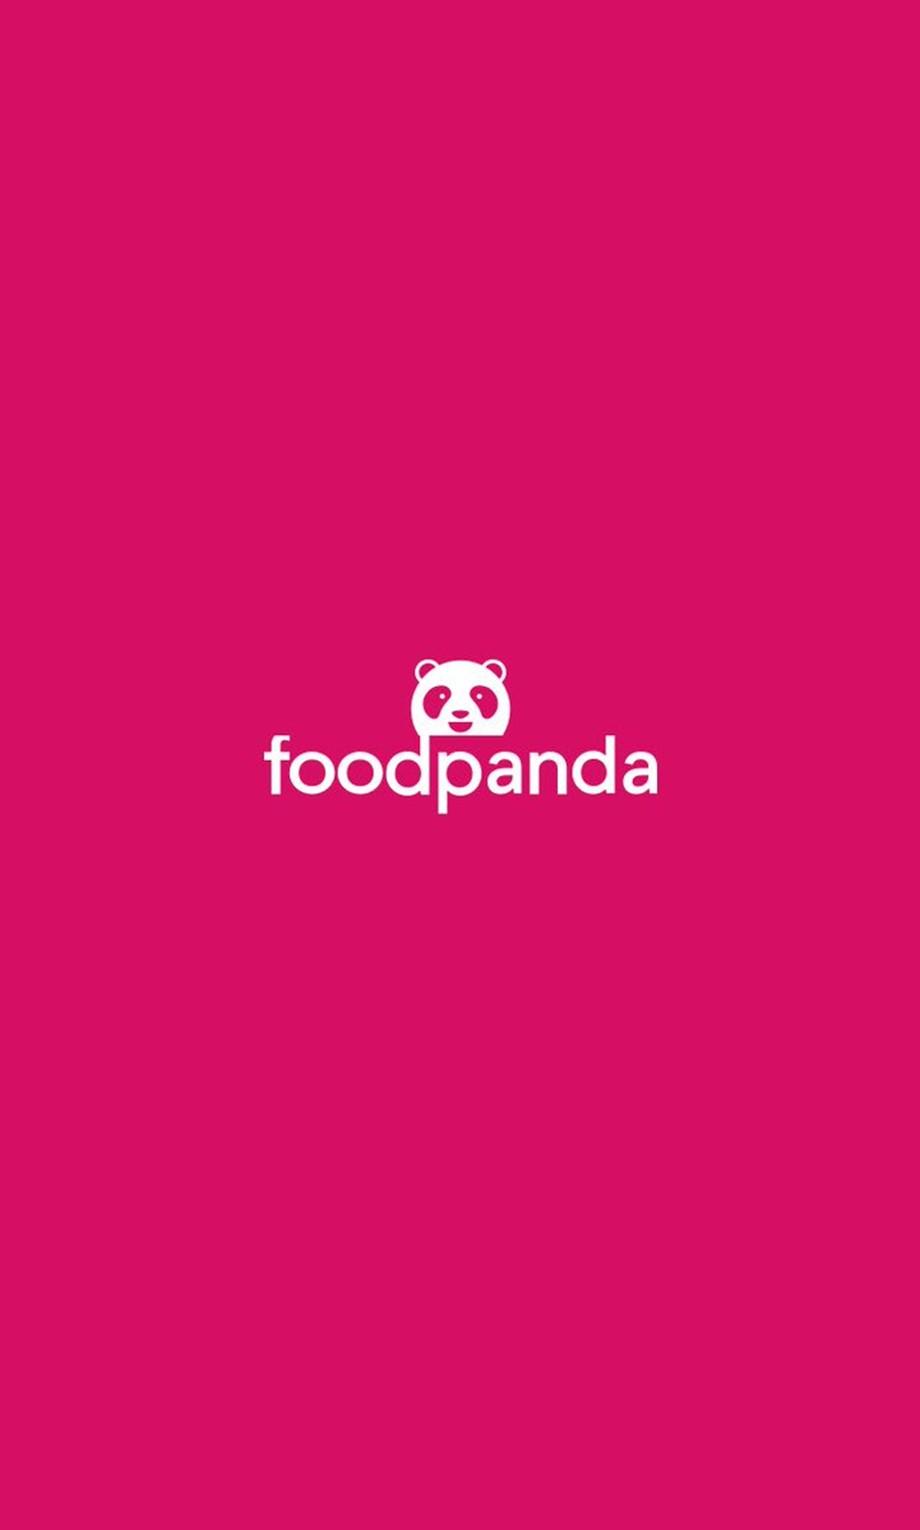 foodpanda Logo - Foodpanda announces expansion of services to 13 more Indian cities